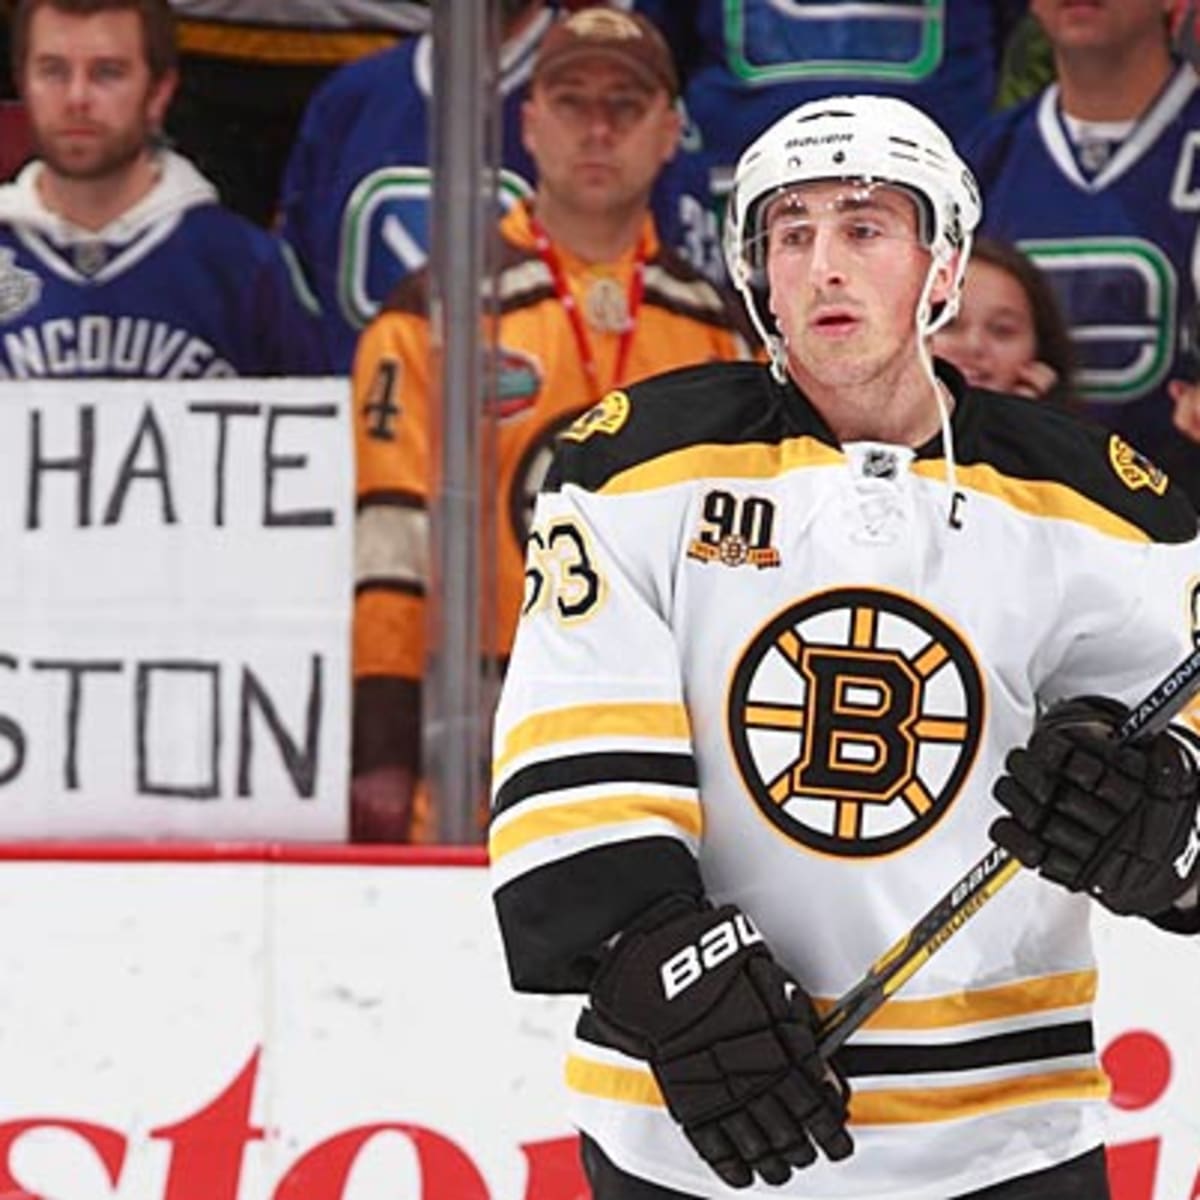 All about Bruins star Brad Marchand with stats and contract info